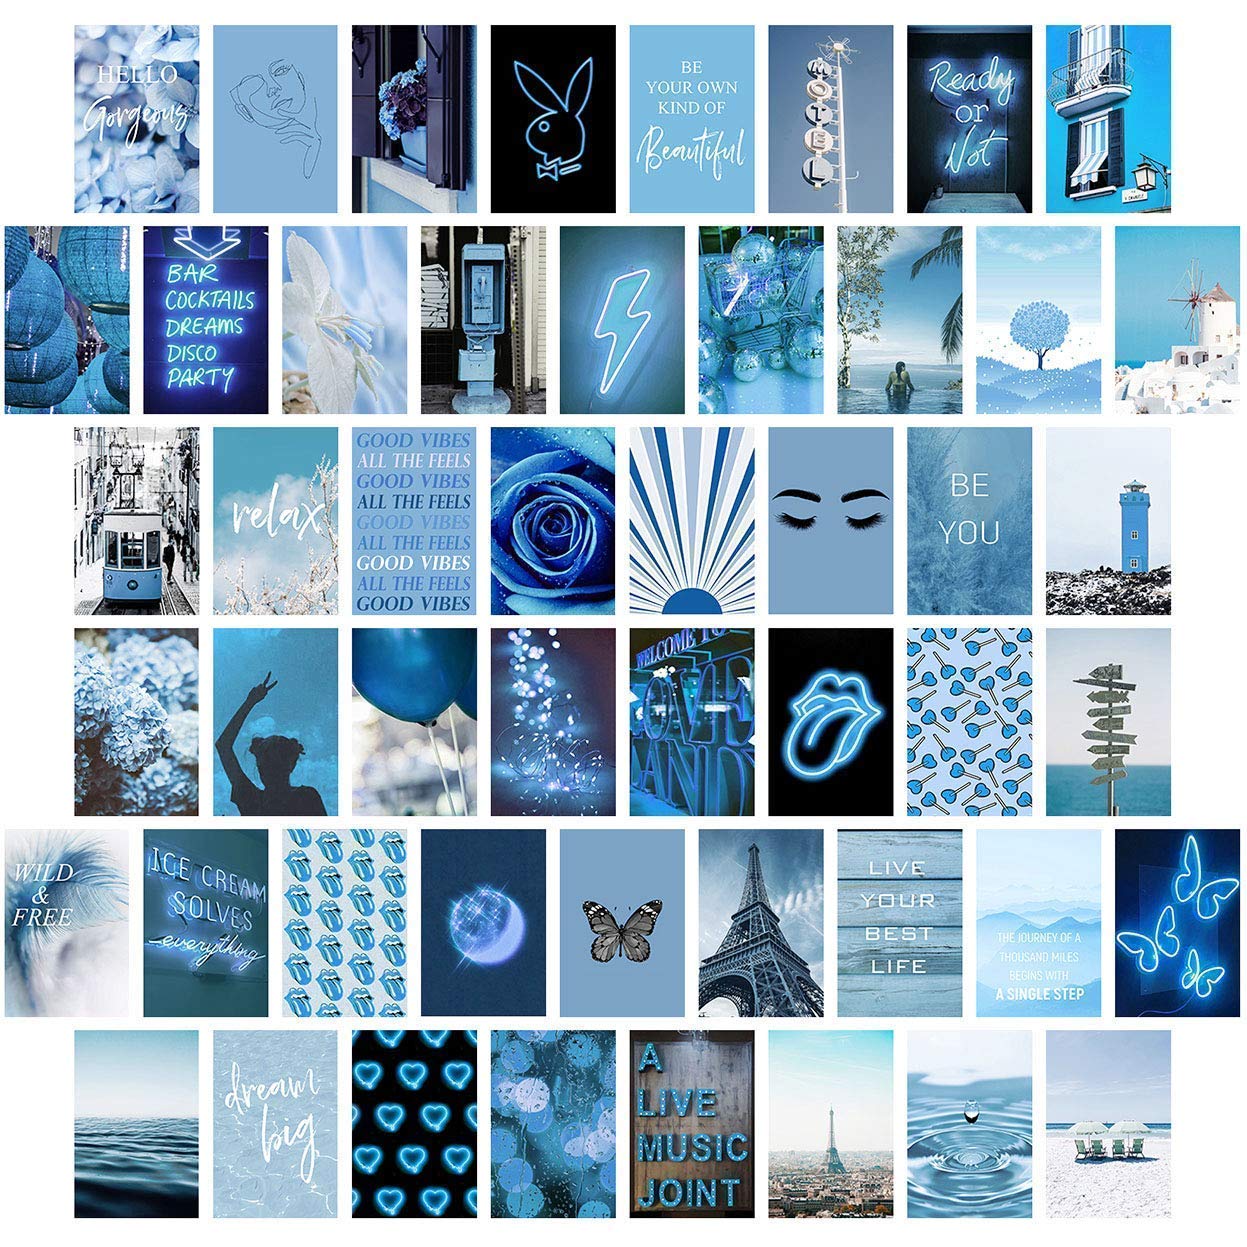 Blue Wall Collage Kit Aesthetic Picture, Bedroom Decor for Teen Girls, Wall Collage Kit, Collage Kit for Wall Aesthetic, VSCO Girls Bedroom Decor, Aesthetic Posters, Collage Kit (50 Set 4x6 inch)